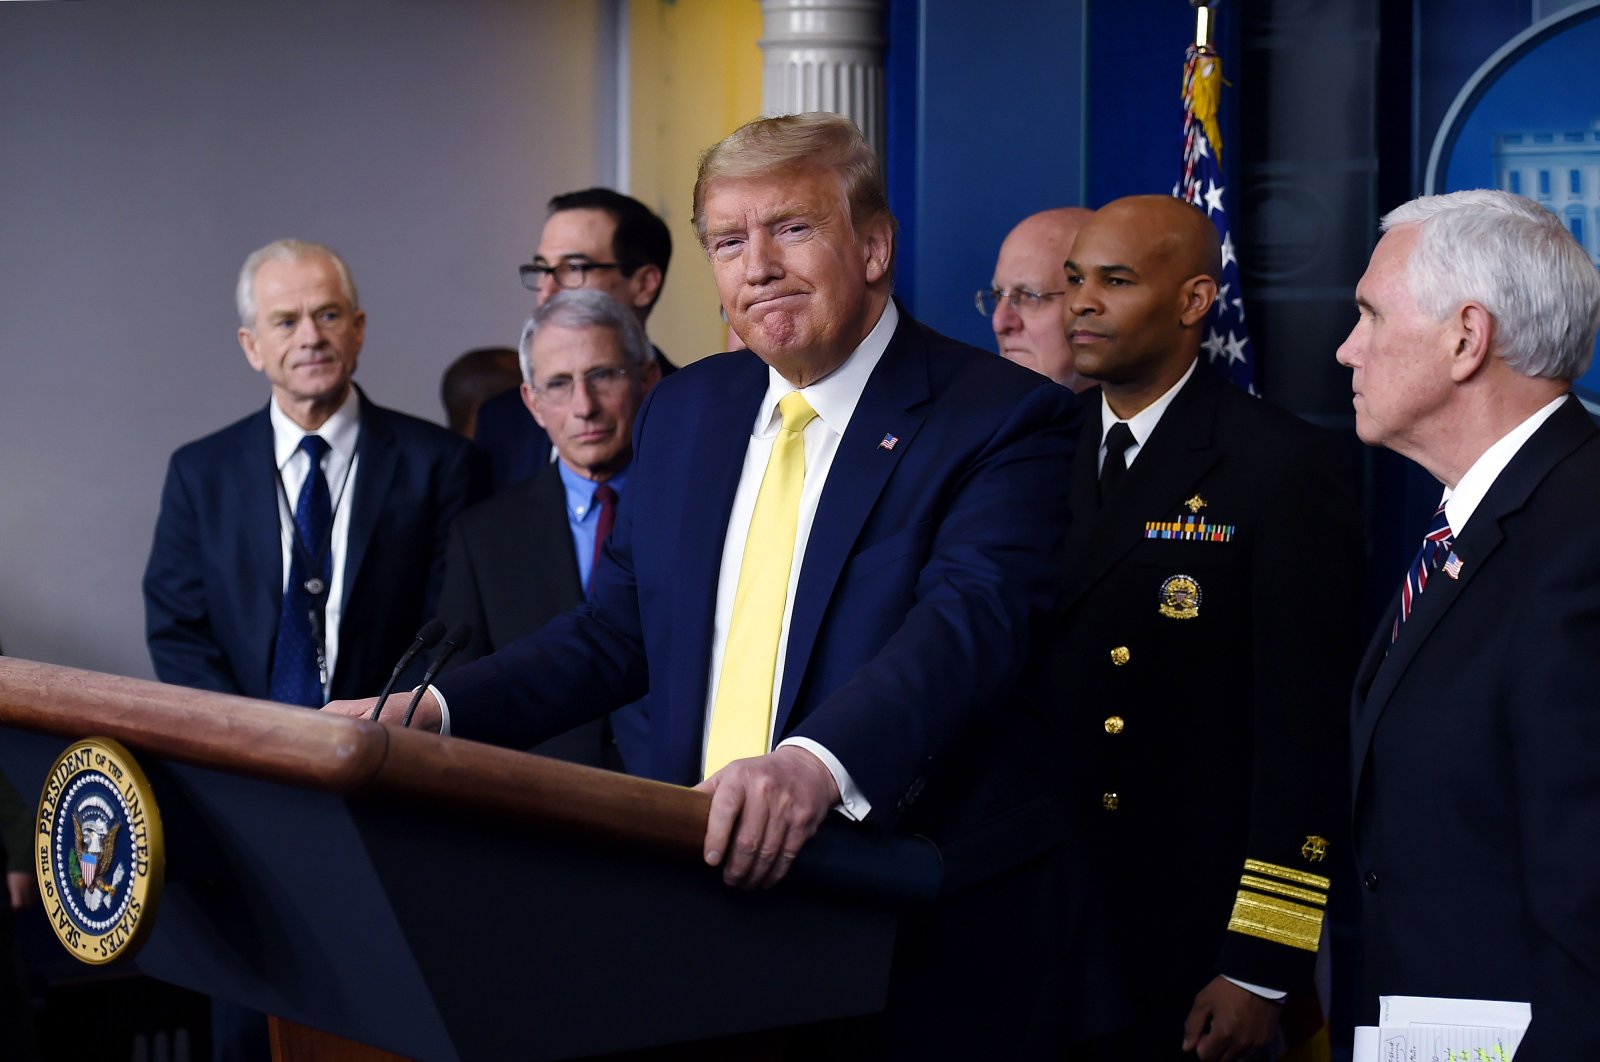 U.S. President Donald Trump speaks about the COVID-19 (coronavirus) alongside Vice President Mike Pence and members of the Coronavirus Task Force at the White House in Washington, D.C., March 9, 2020. (AFP Photo)